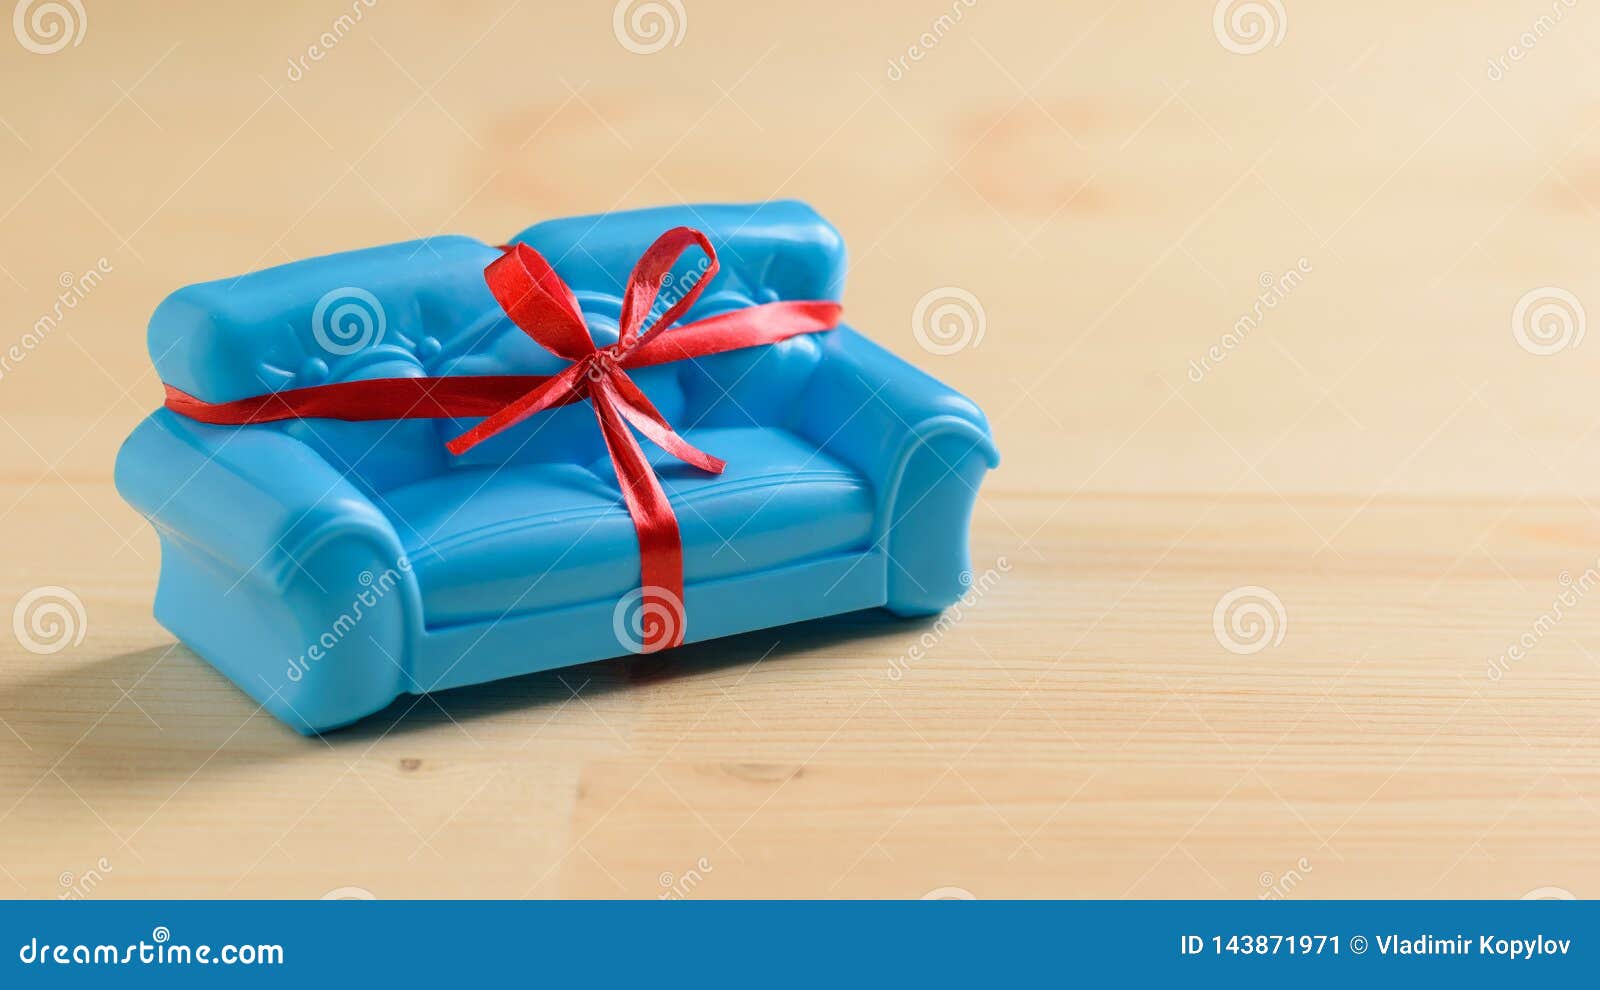 Blue Sofa With Red Ribbon Wooden Floor Made Of Light Wood Unusual